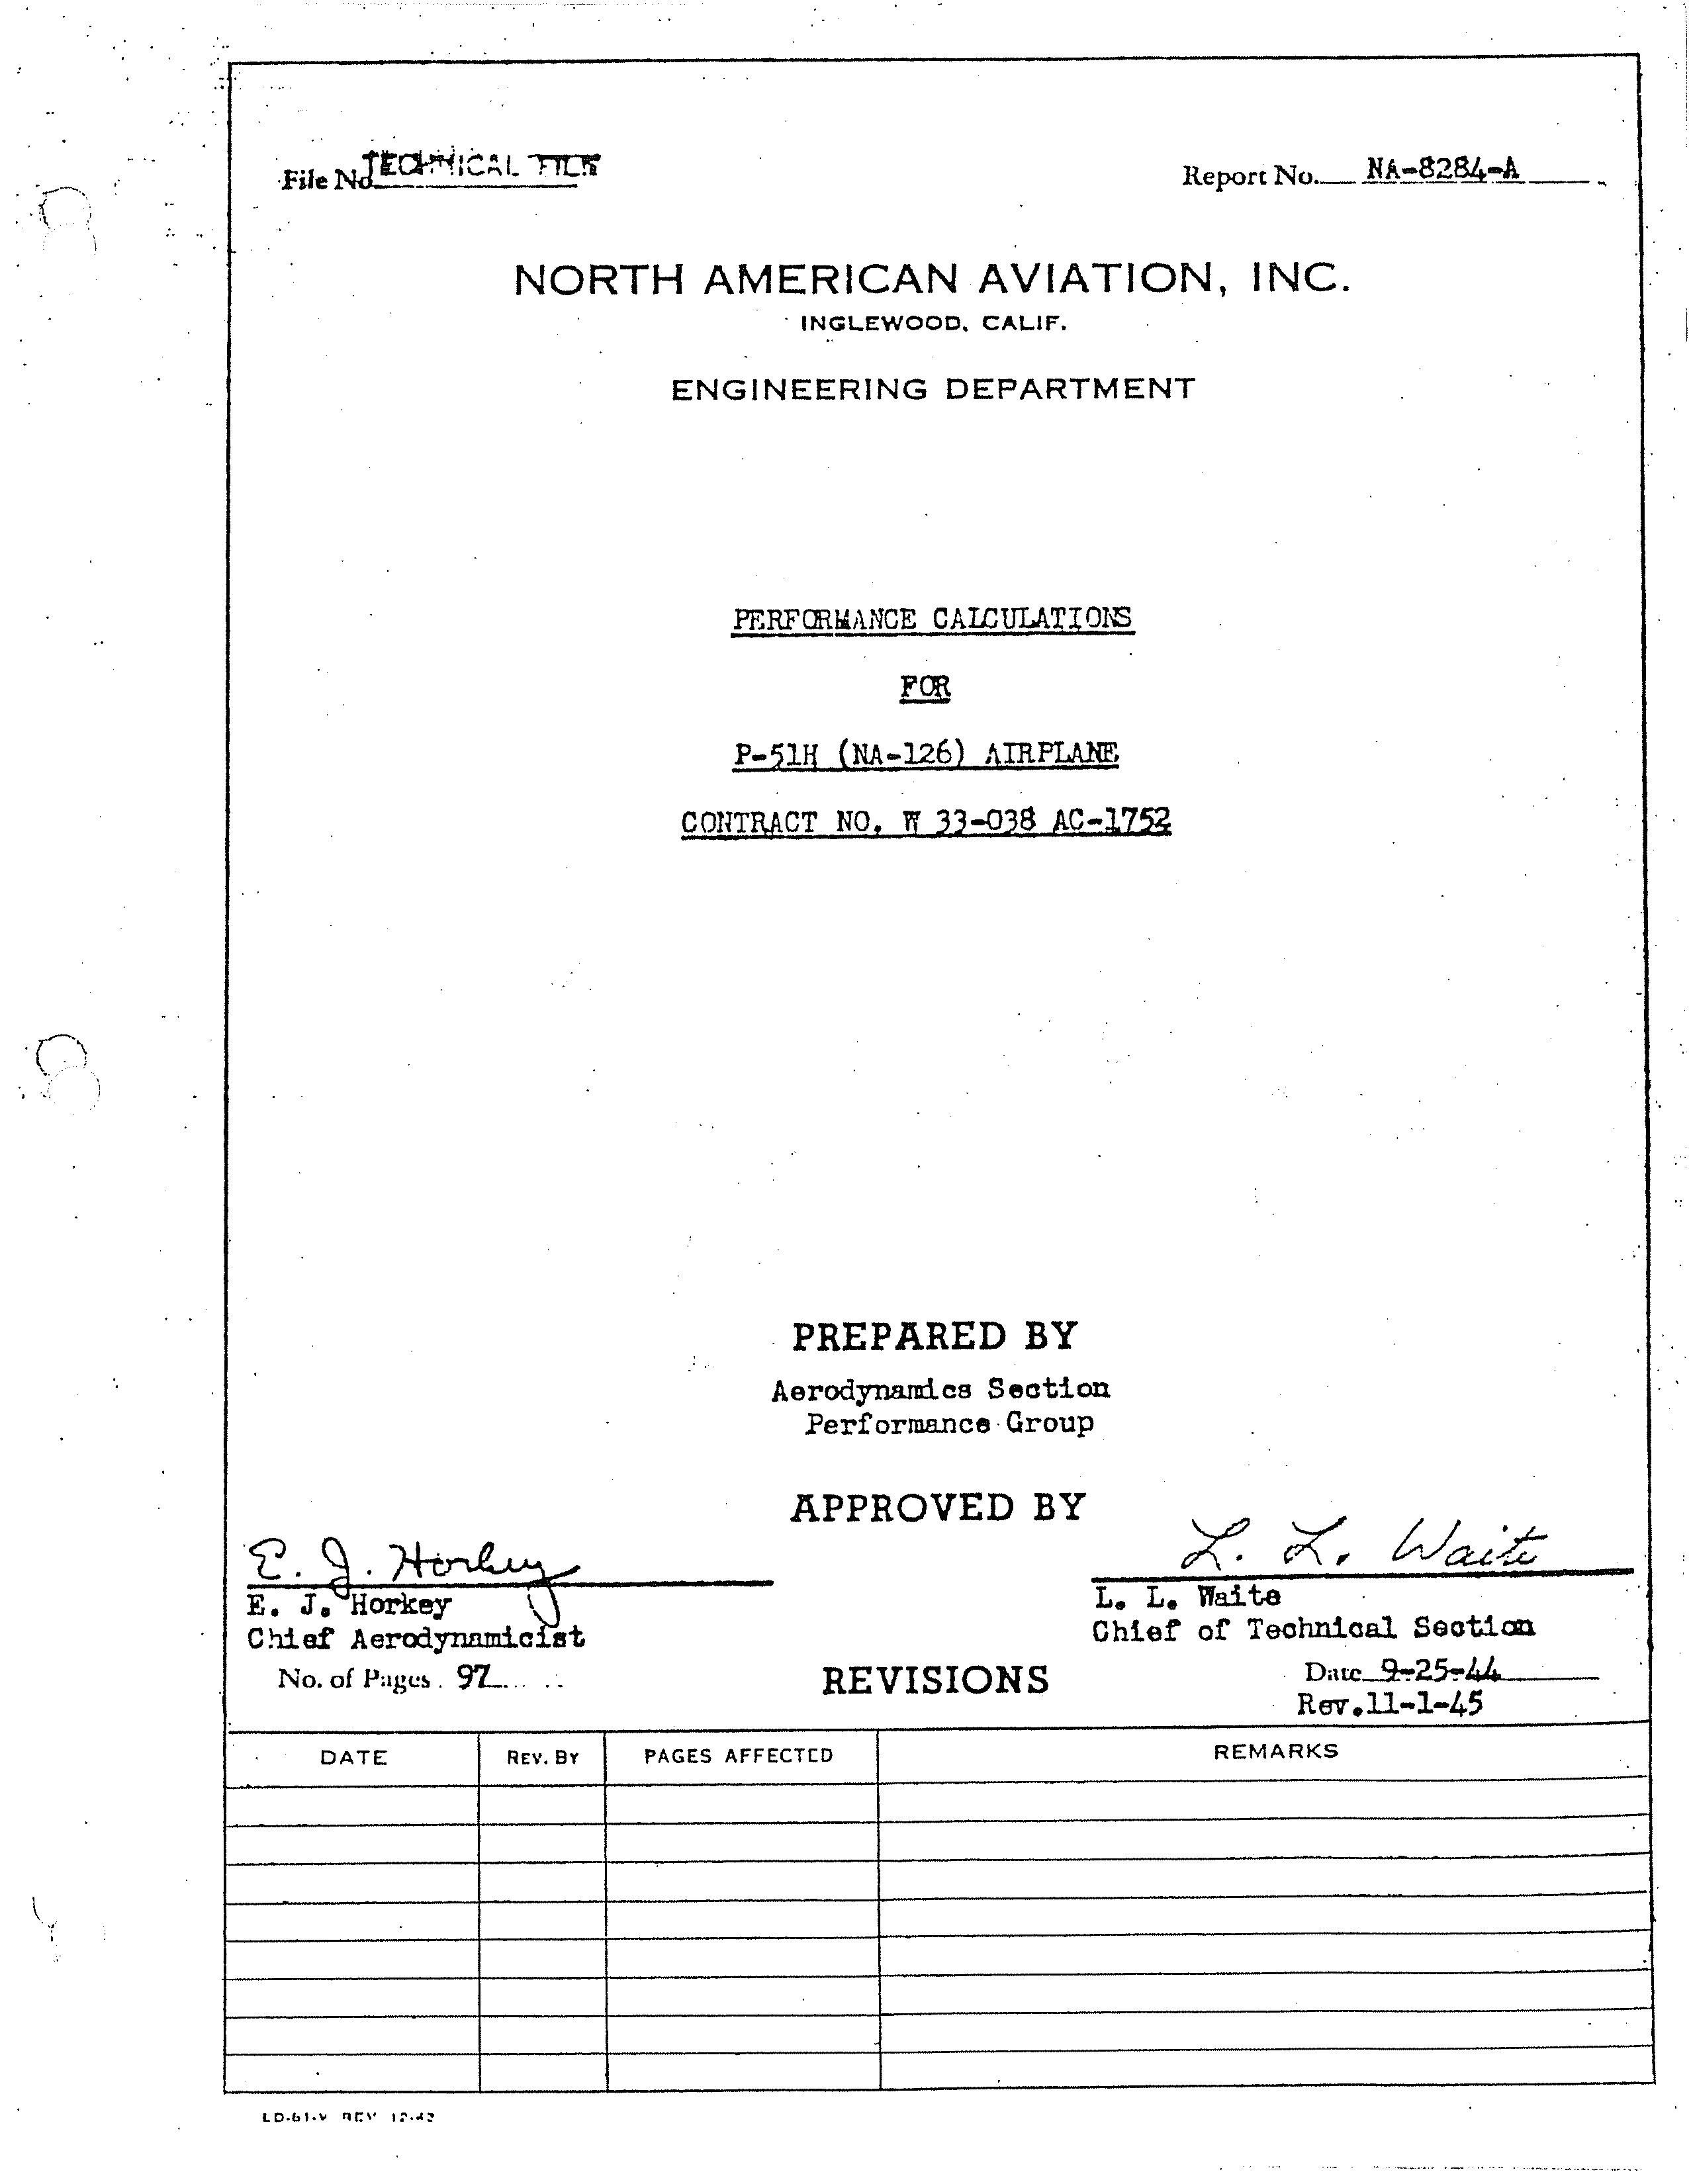 Sample page 2 from AirCorps Library document: Performance Calculations for P-51H (NA-126) Airplanes